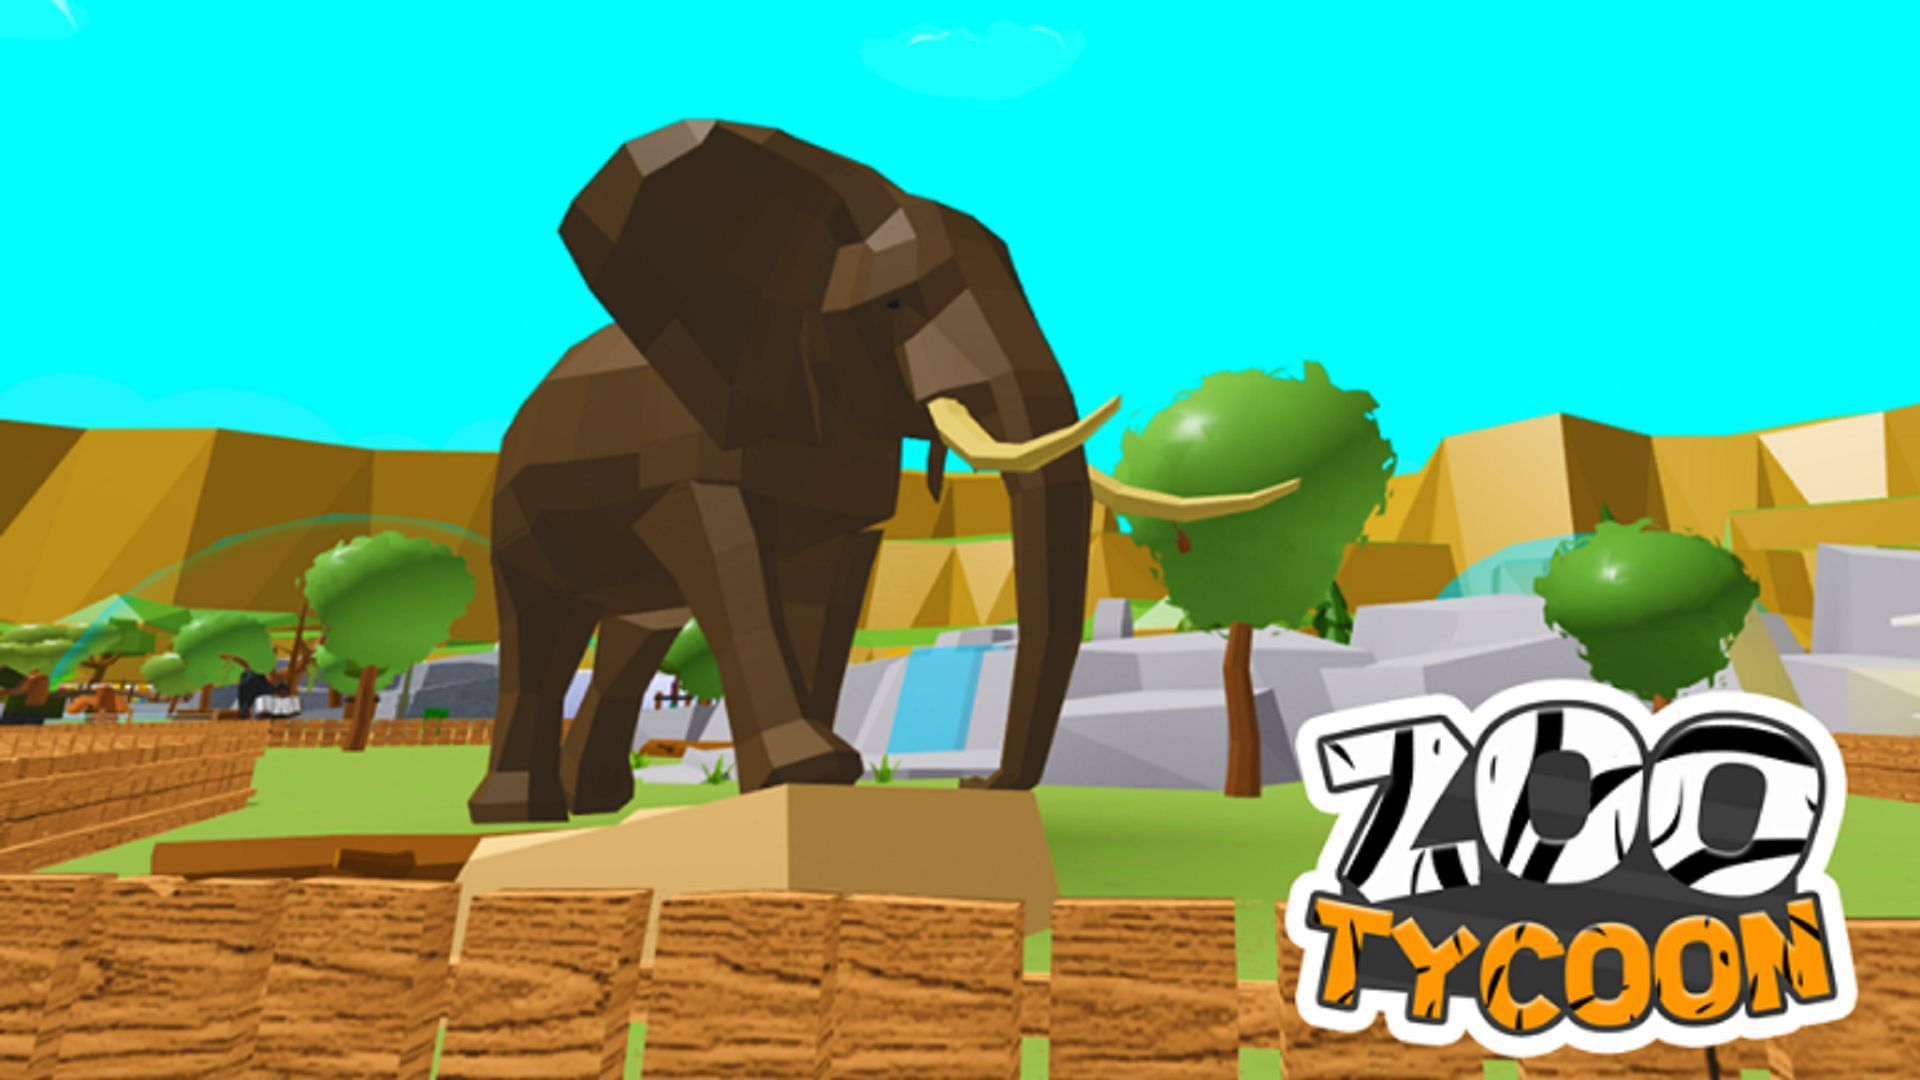 The latest codes in Zoo Tycoon (image via Roblox)